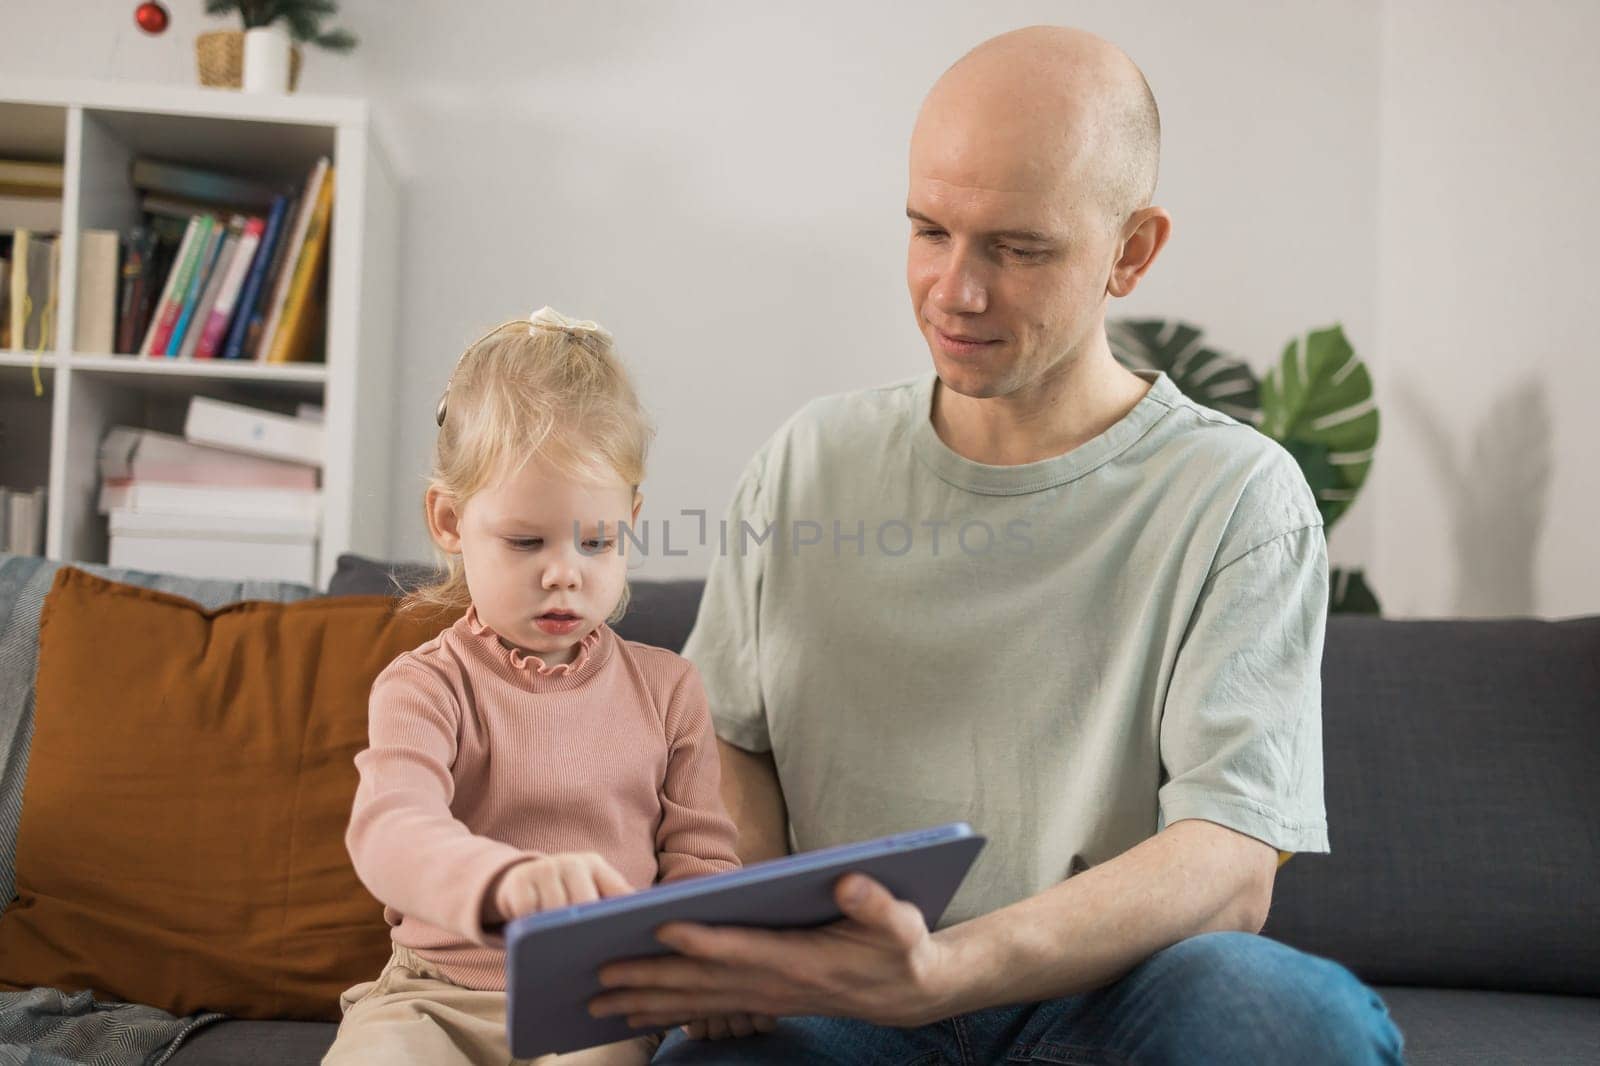 Deaf child girl with cochlear implant studying to hear sounds and have fun with father - recovery after cochlear Implant surgery and rehabilitation concept by Satura86